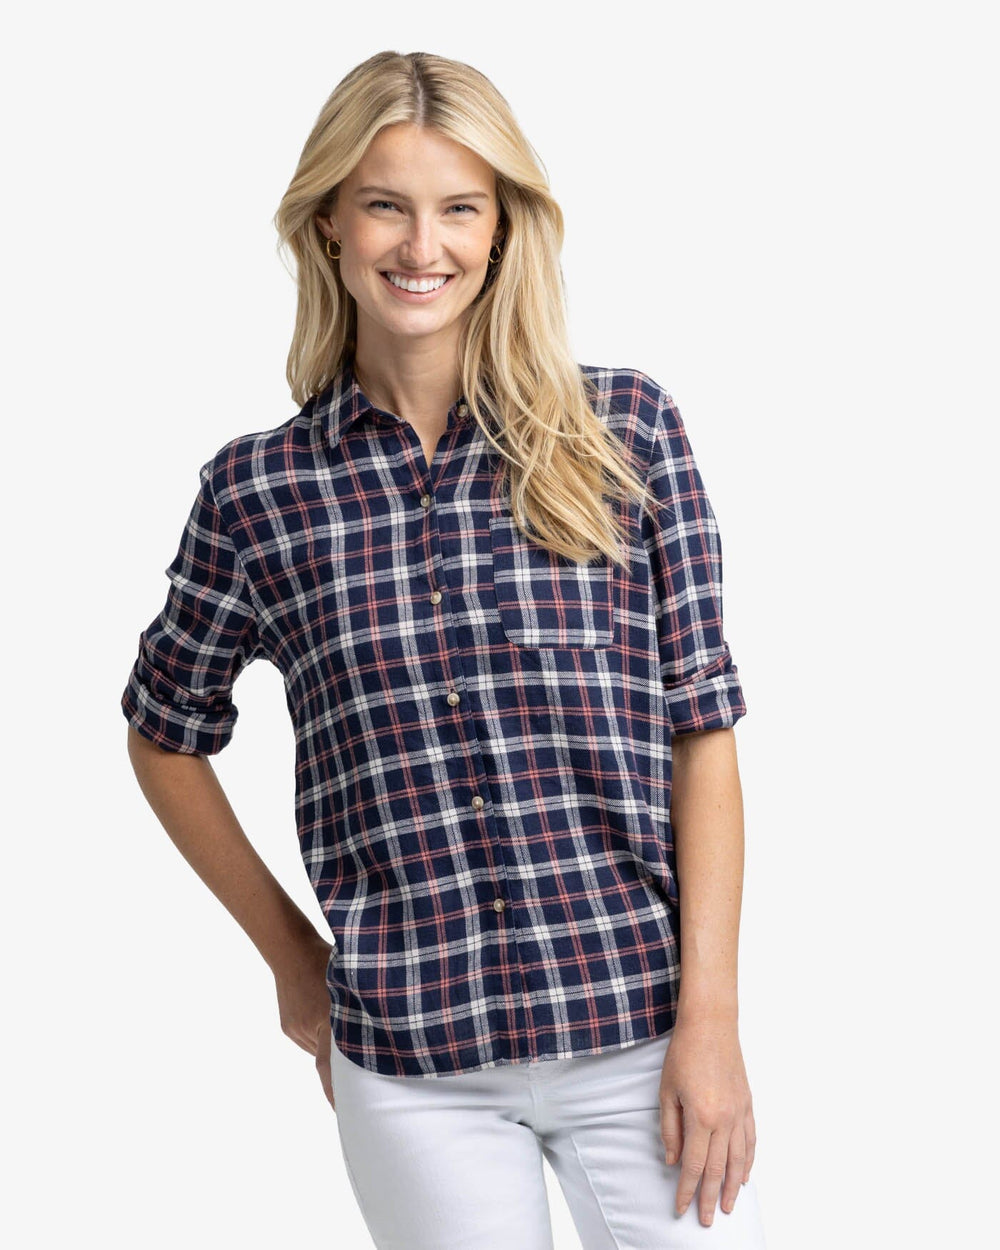 The front view of the Southern Tide Niki Chilly Morning Plaid Shirt by Southern Tide - Nautical Navy